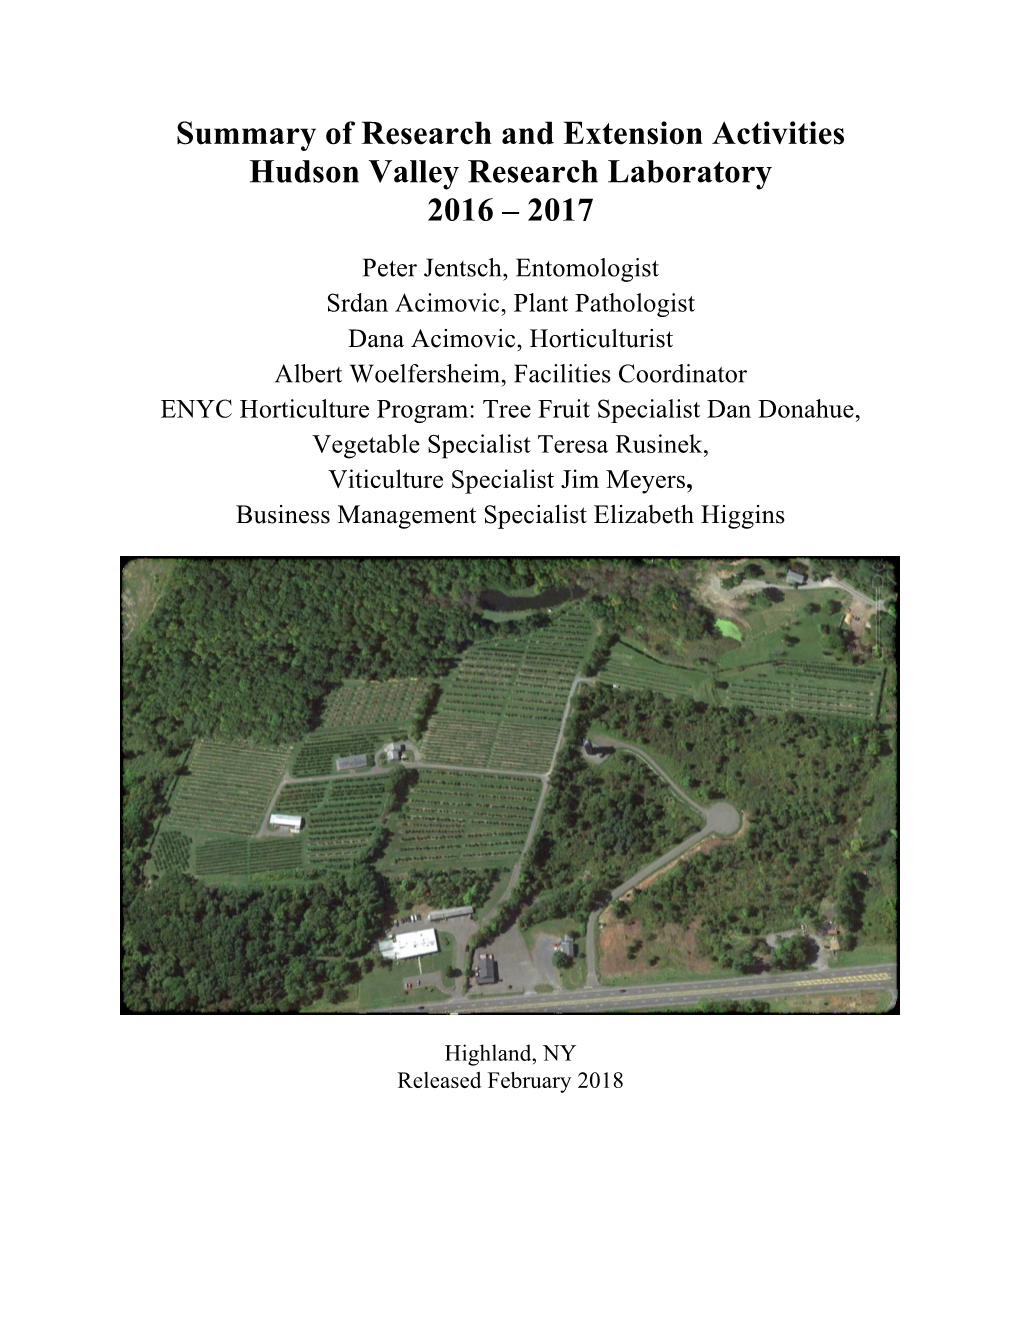 Summary of Research and Extension Activities Hudson Valley Research Laboratory 2016 – 2017